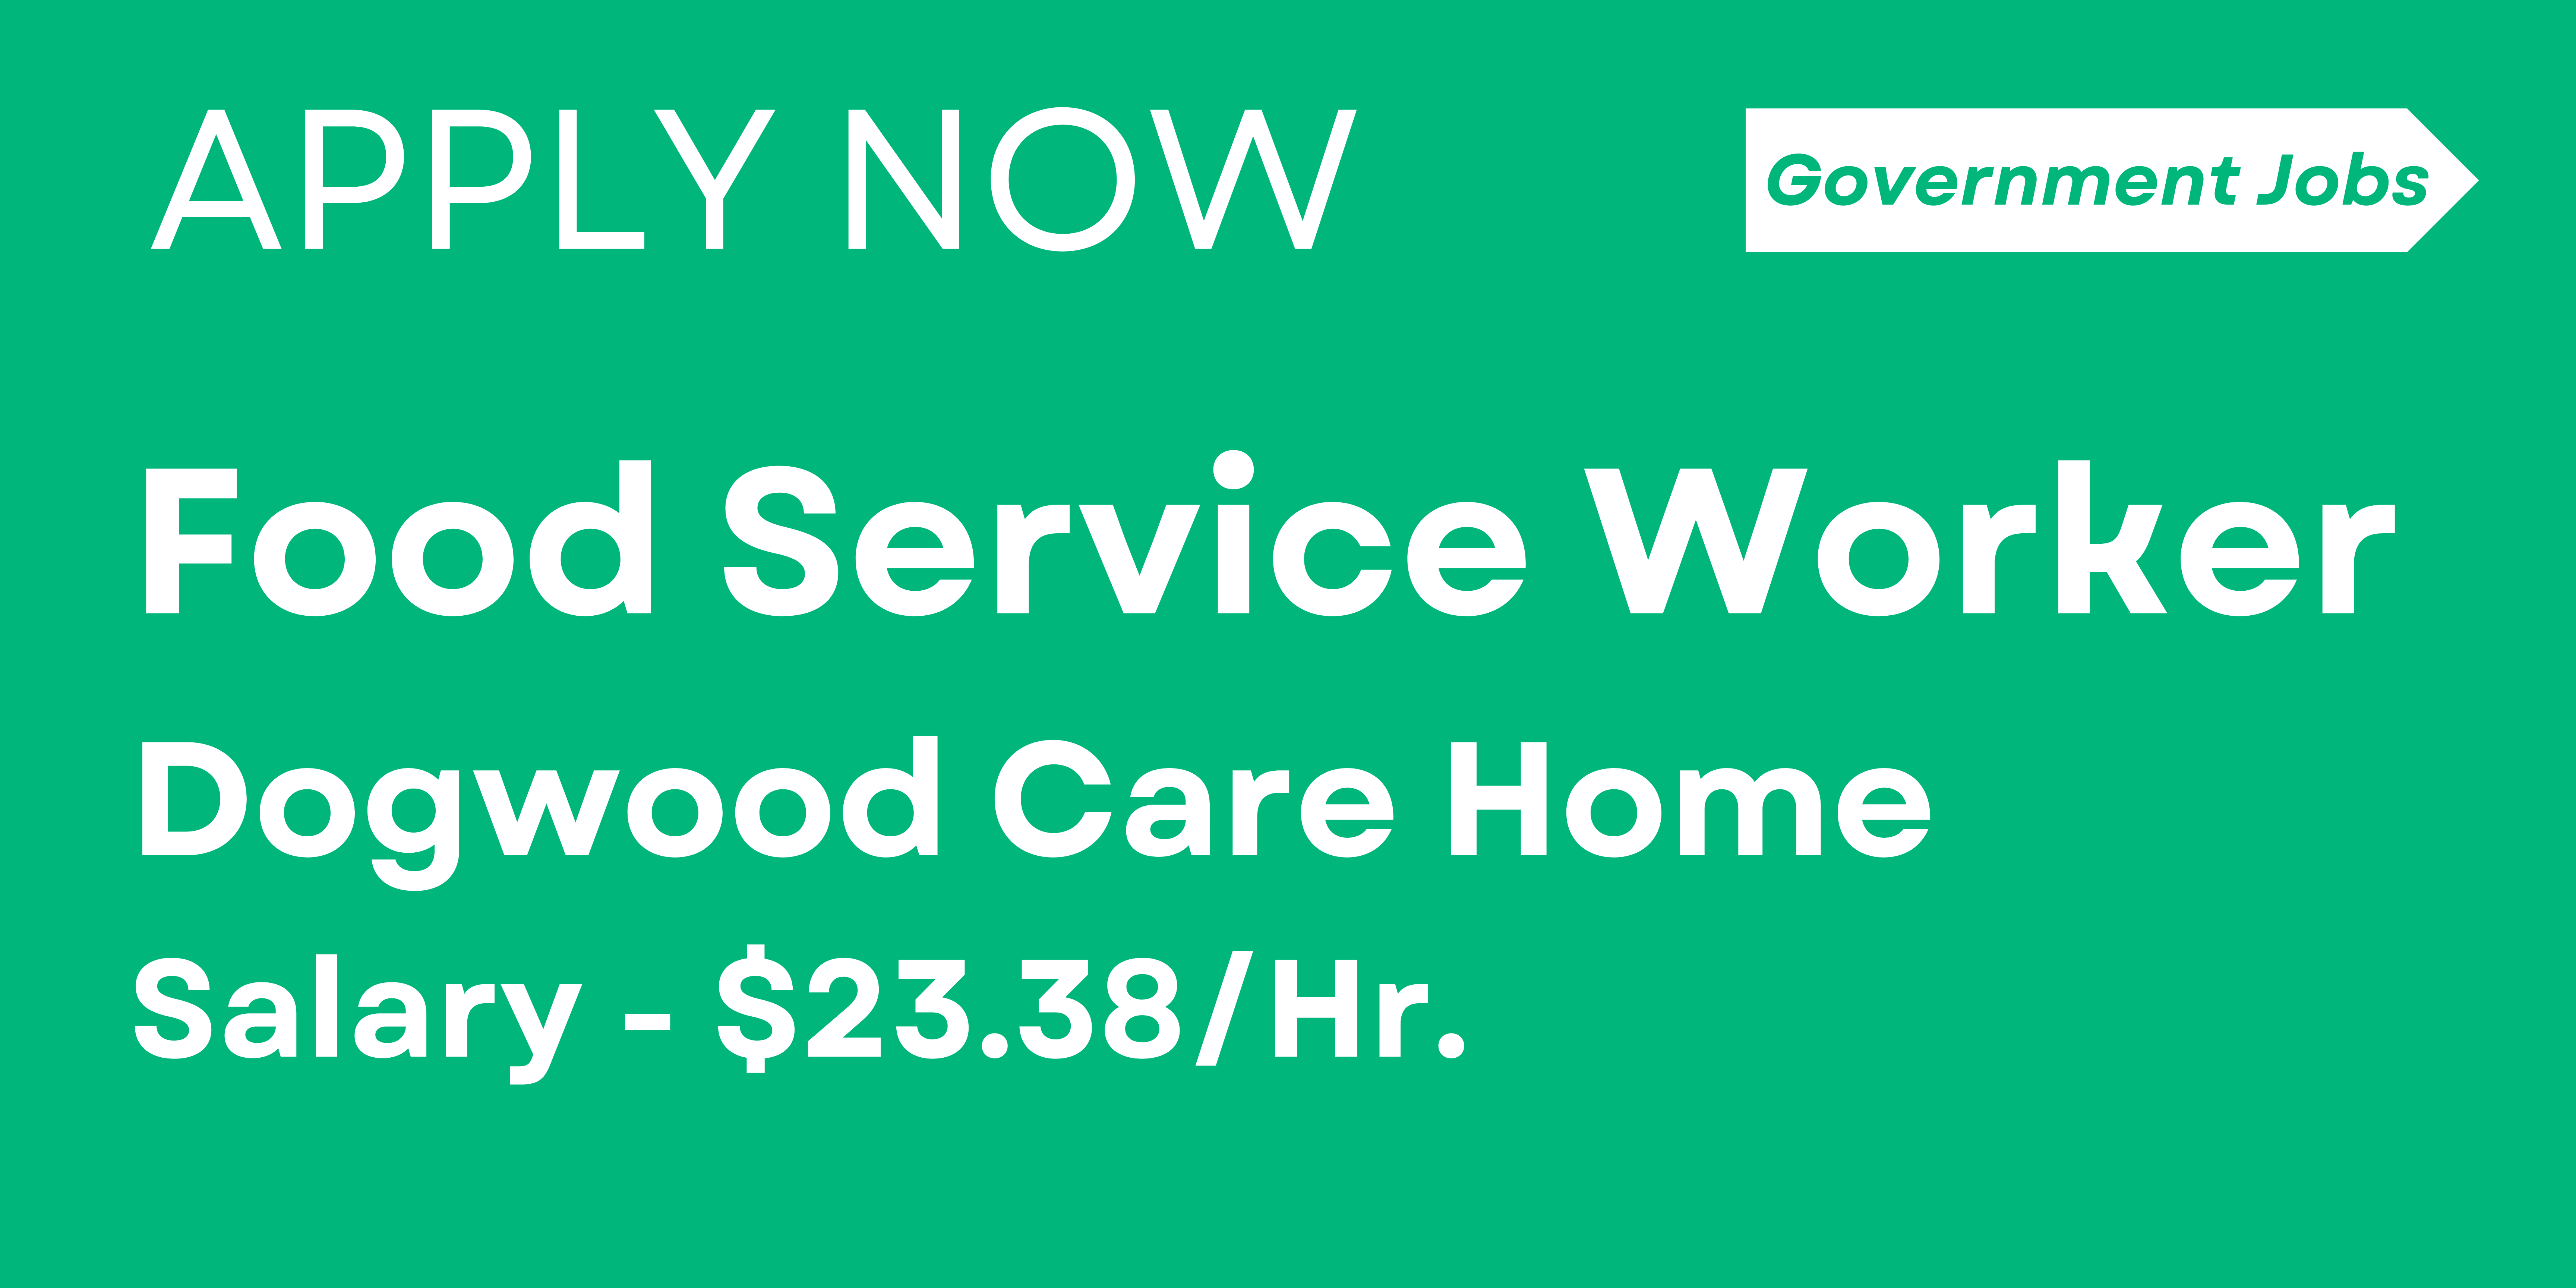 Food Service Worker I Dogwood Care Home I Entry level Government Jobs